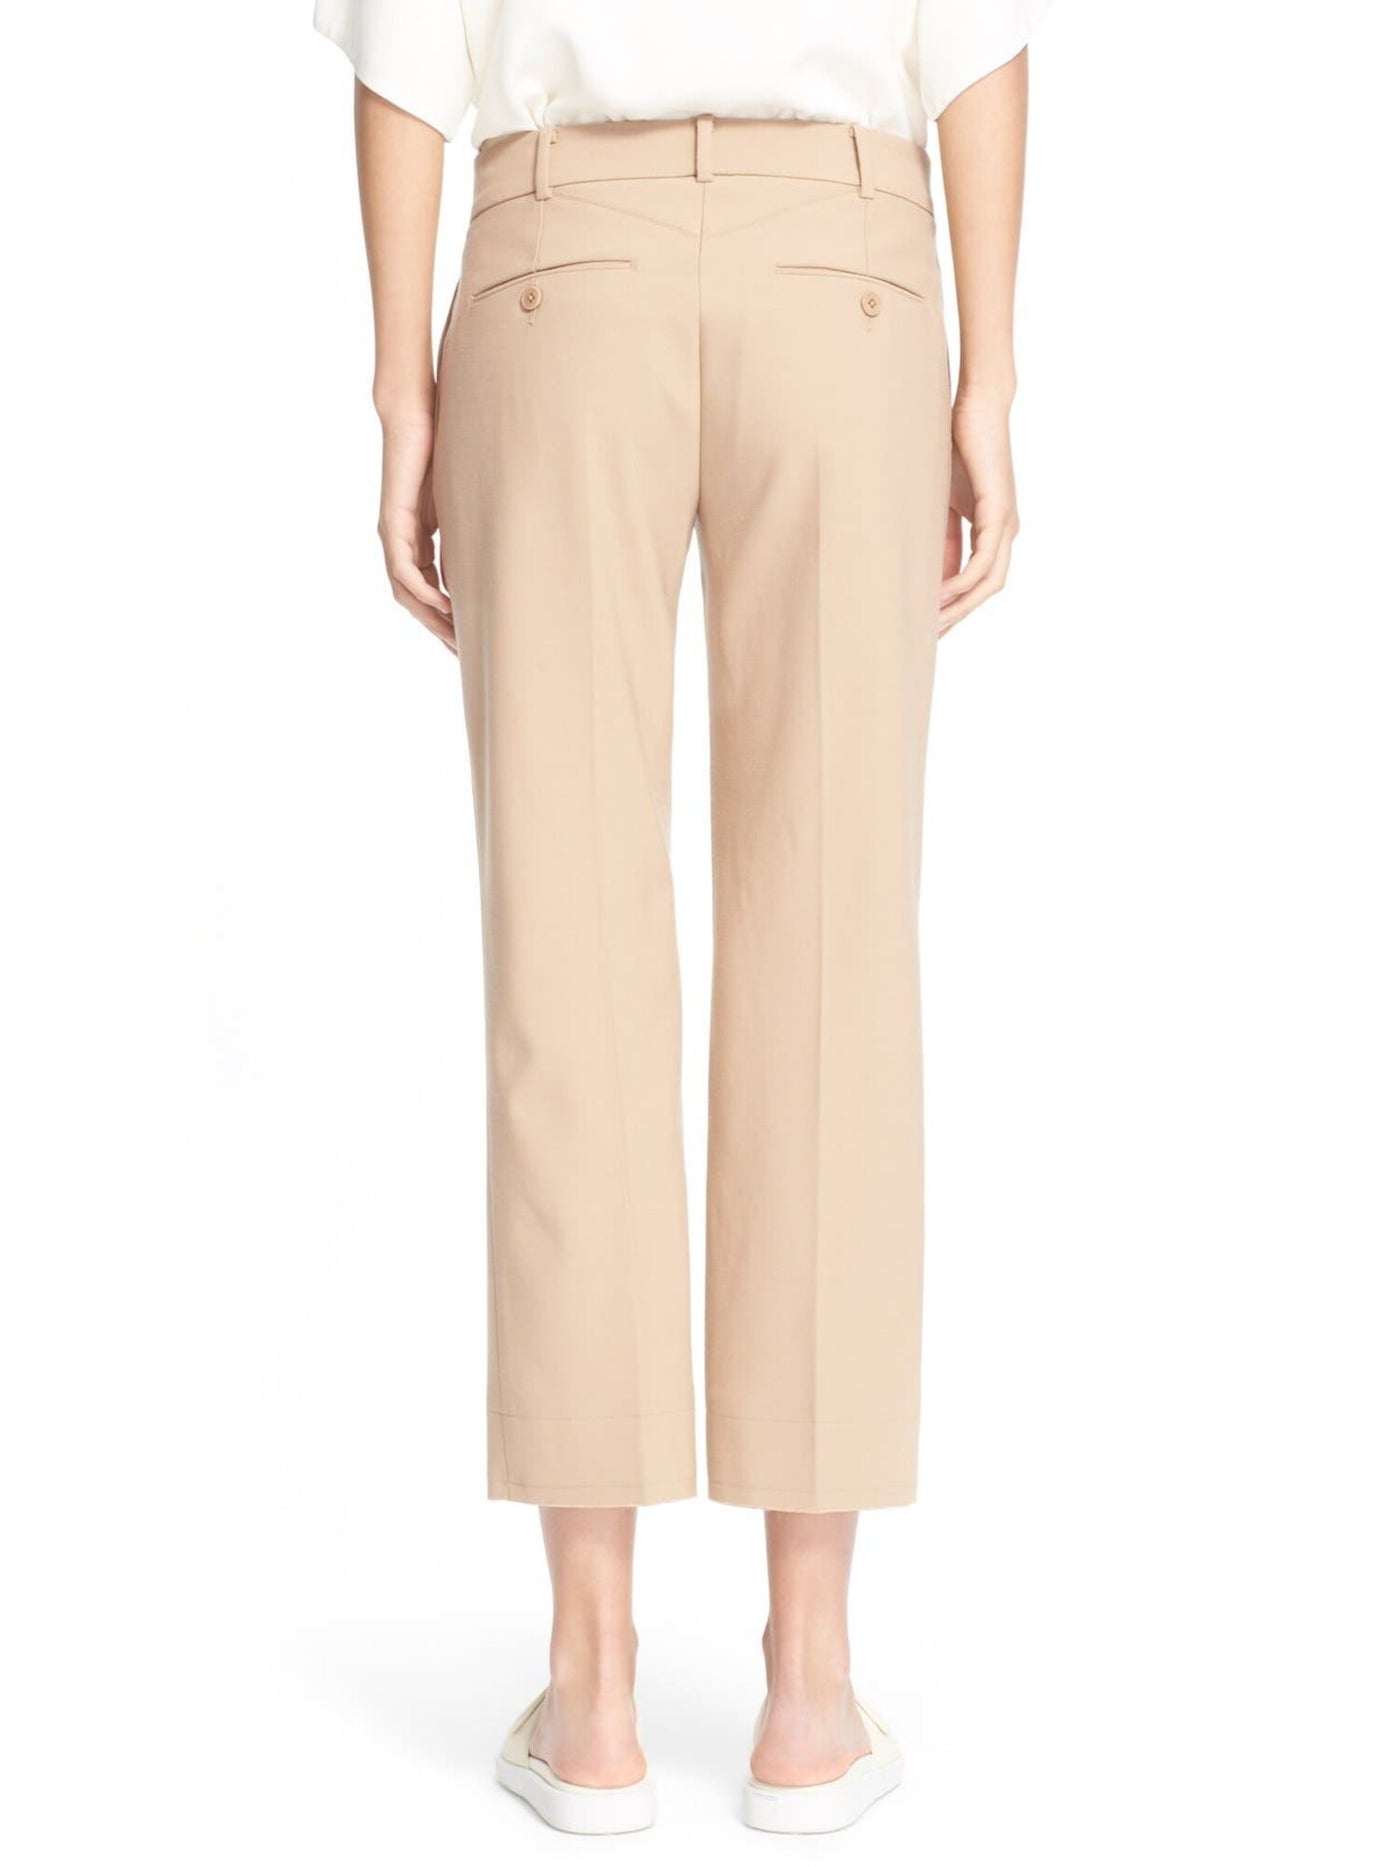 HELMUT LANG Womens Beige Stretch Pocketed Zippered Bonded Hem Hook And Bar Closure Wear To Work Cropped Pants 0